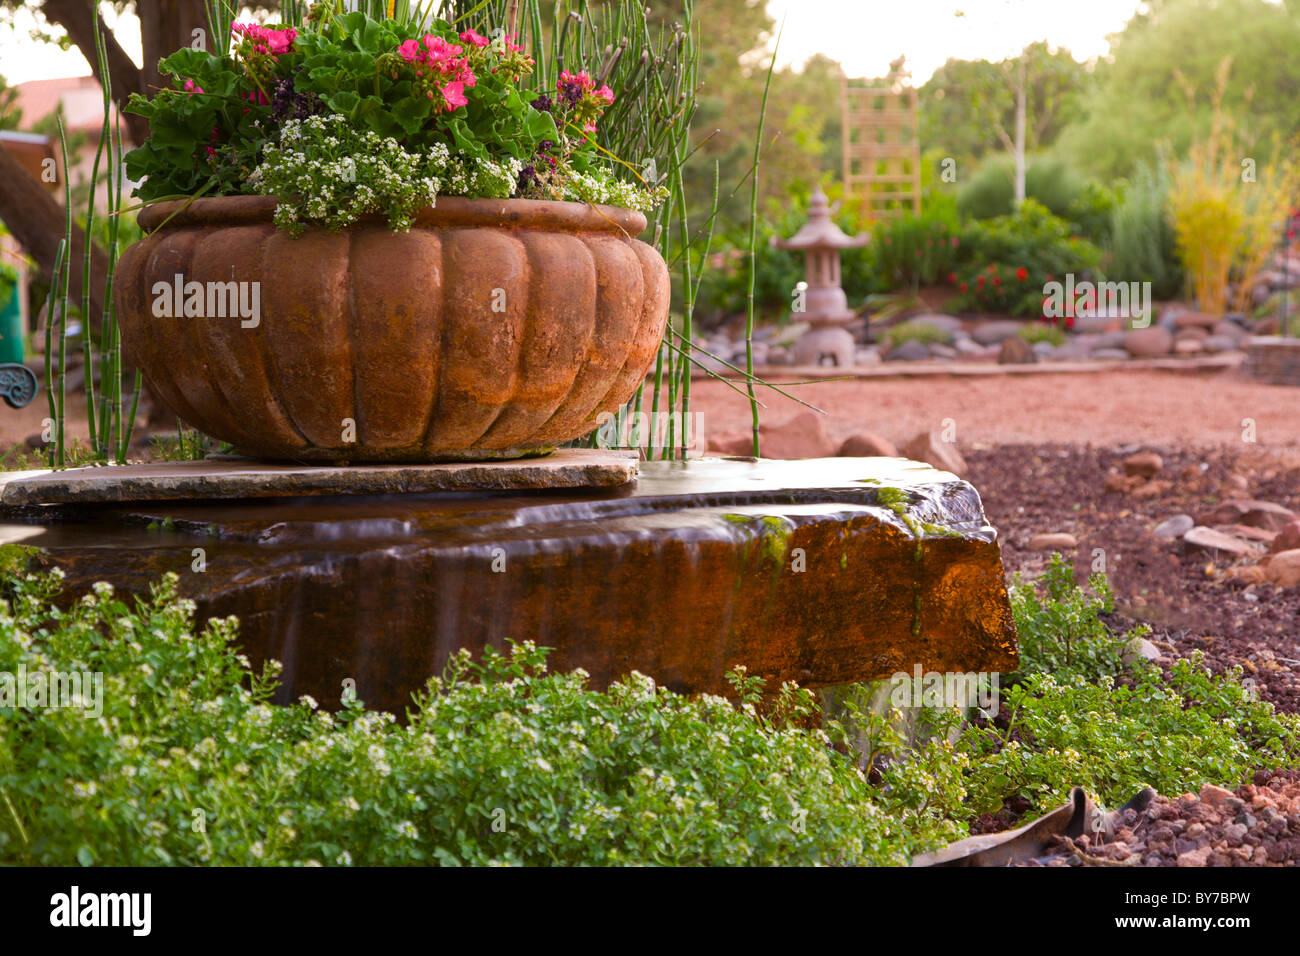 A water feature in a garden Stock Photo